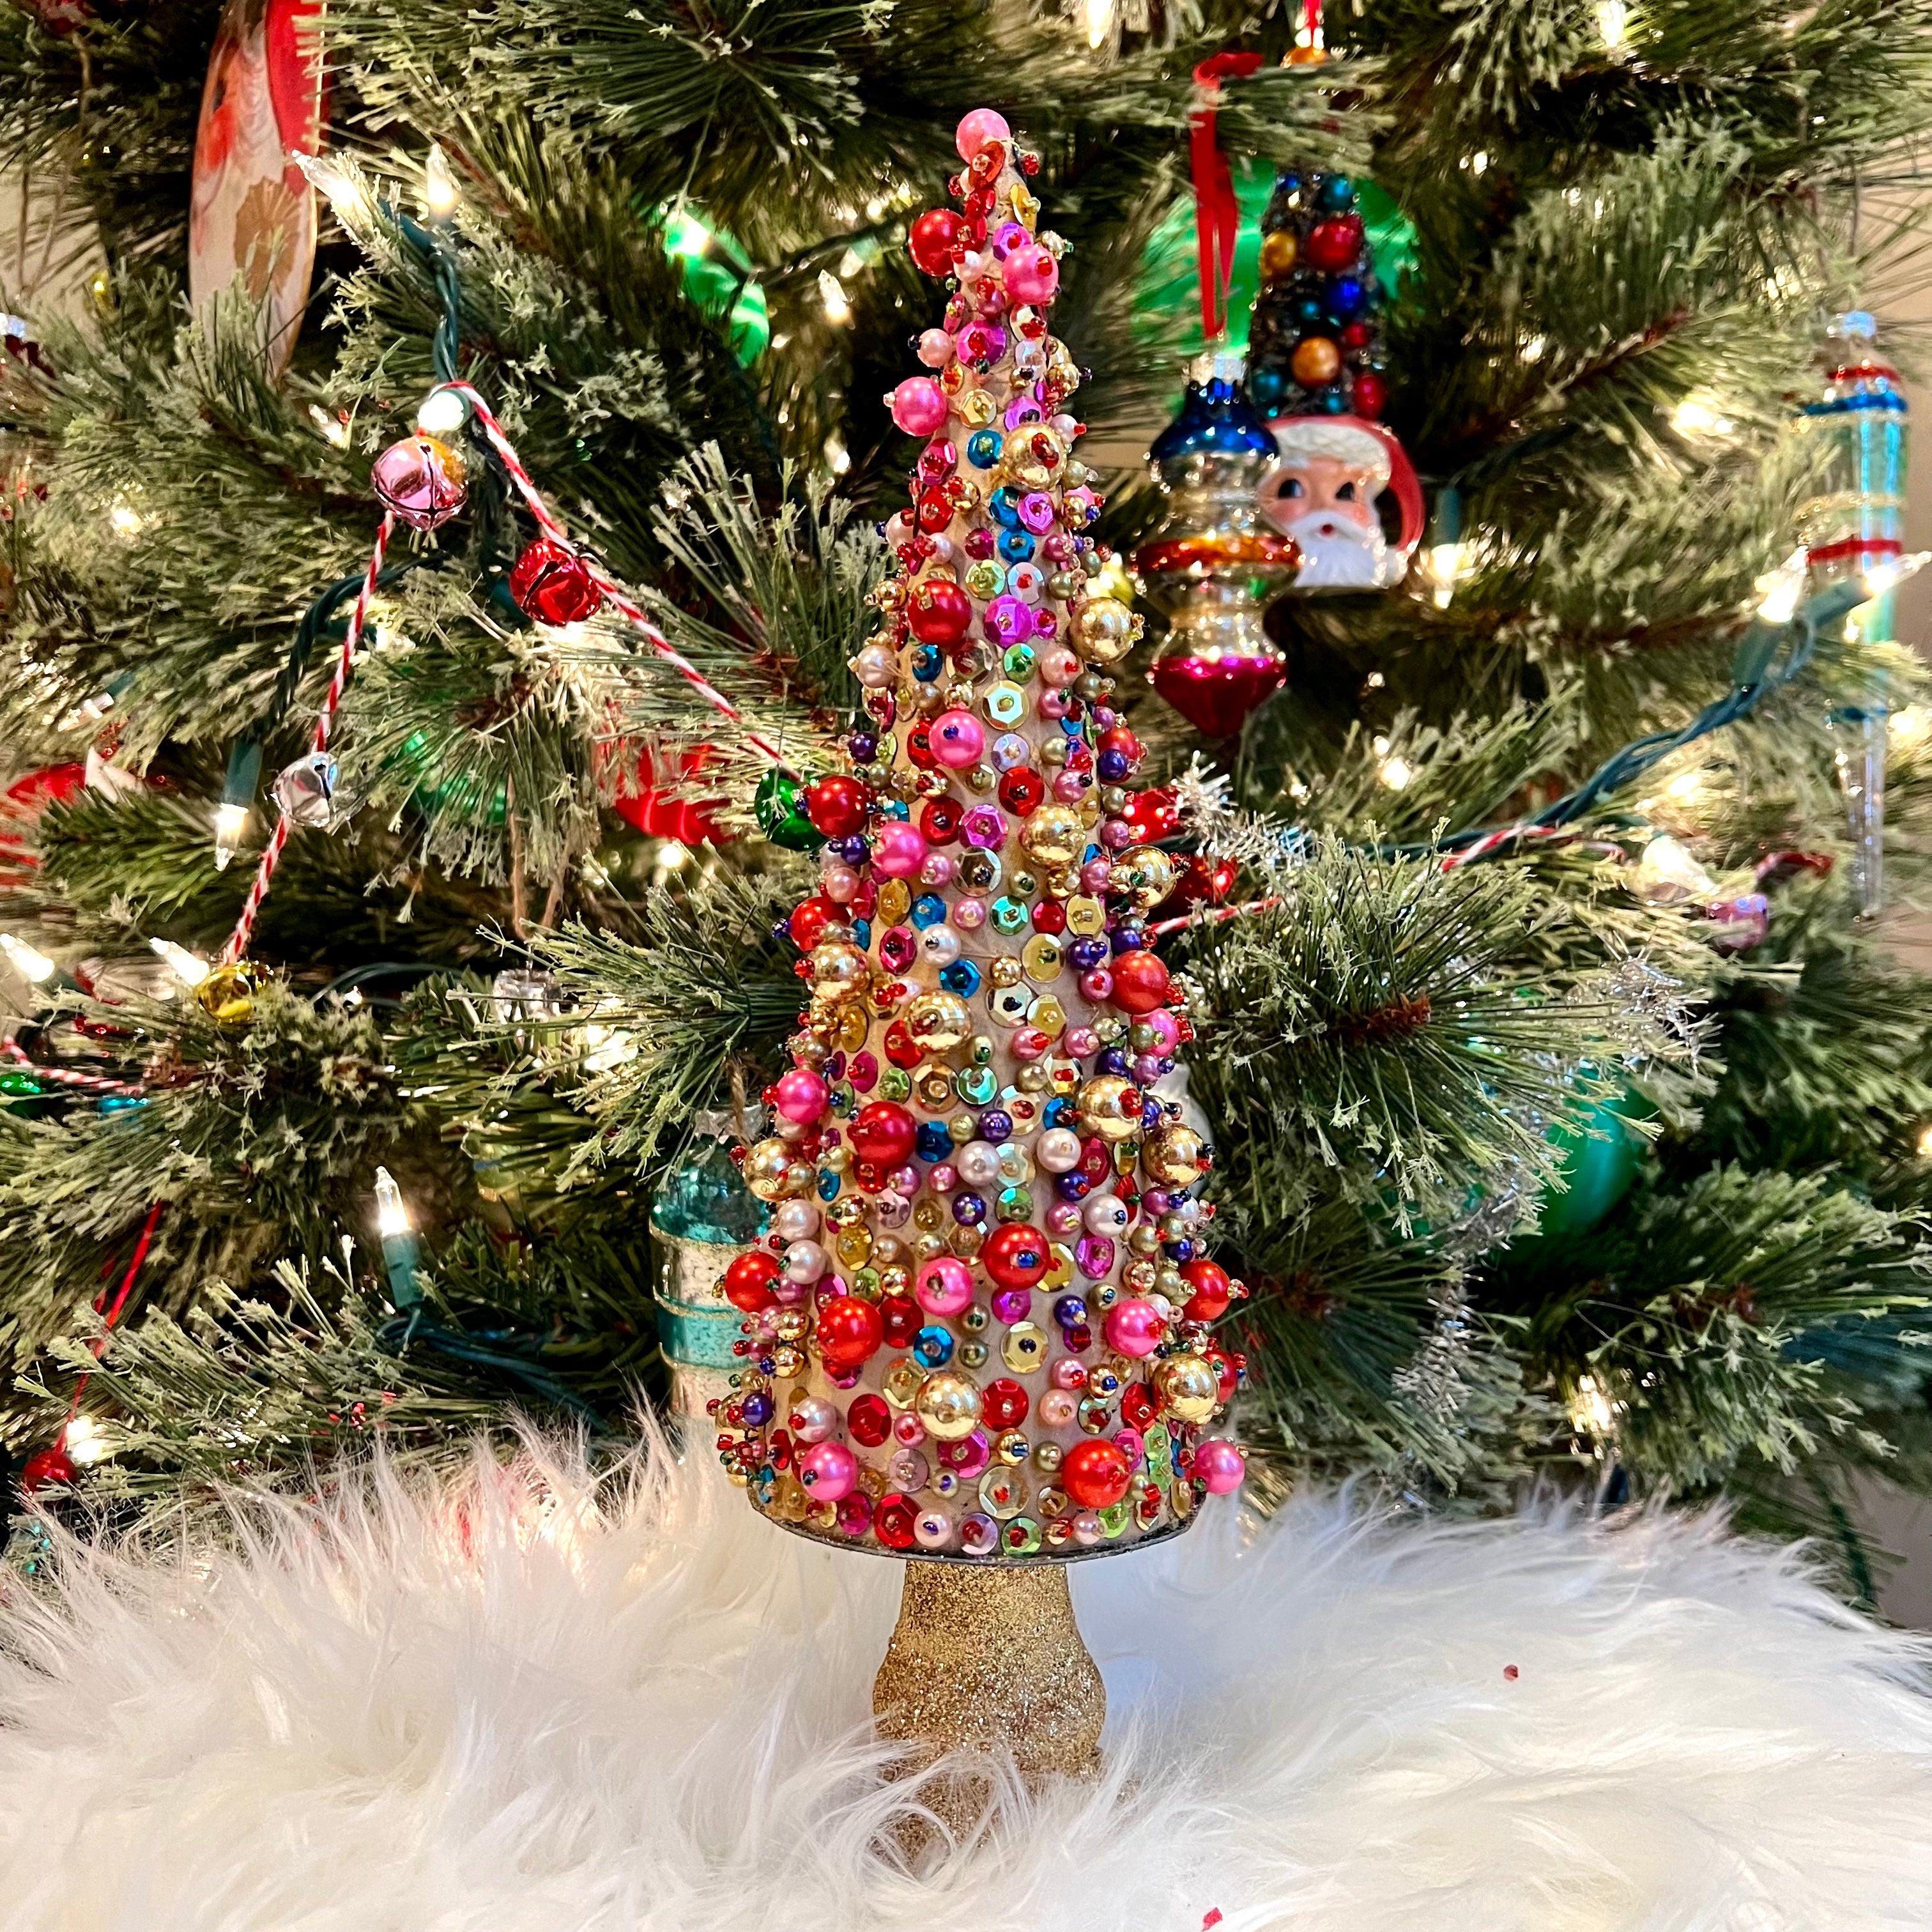 Pastel Candy Cane Snowman with Tree